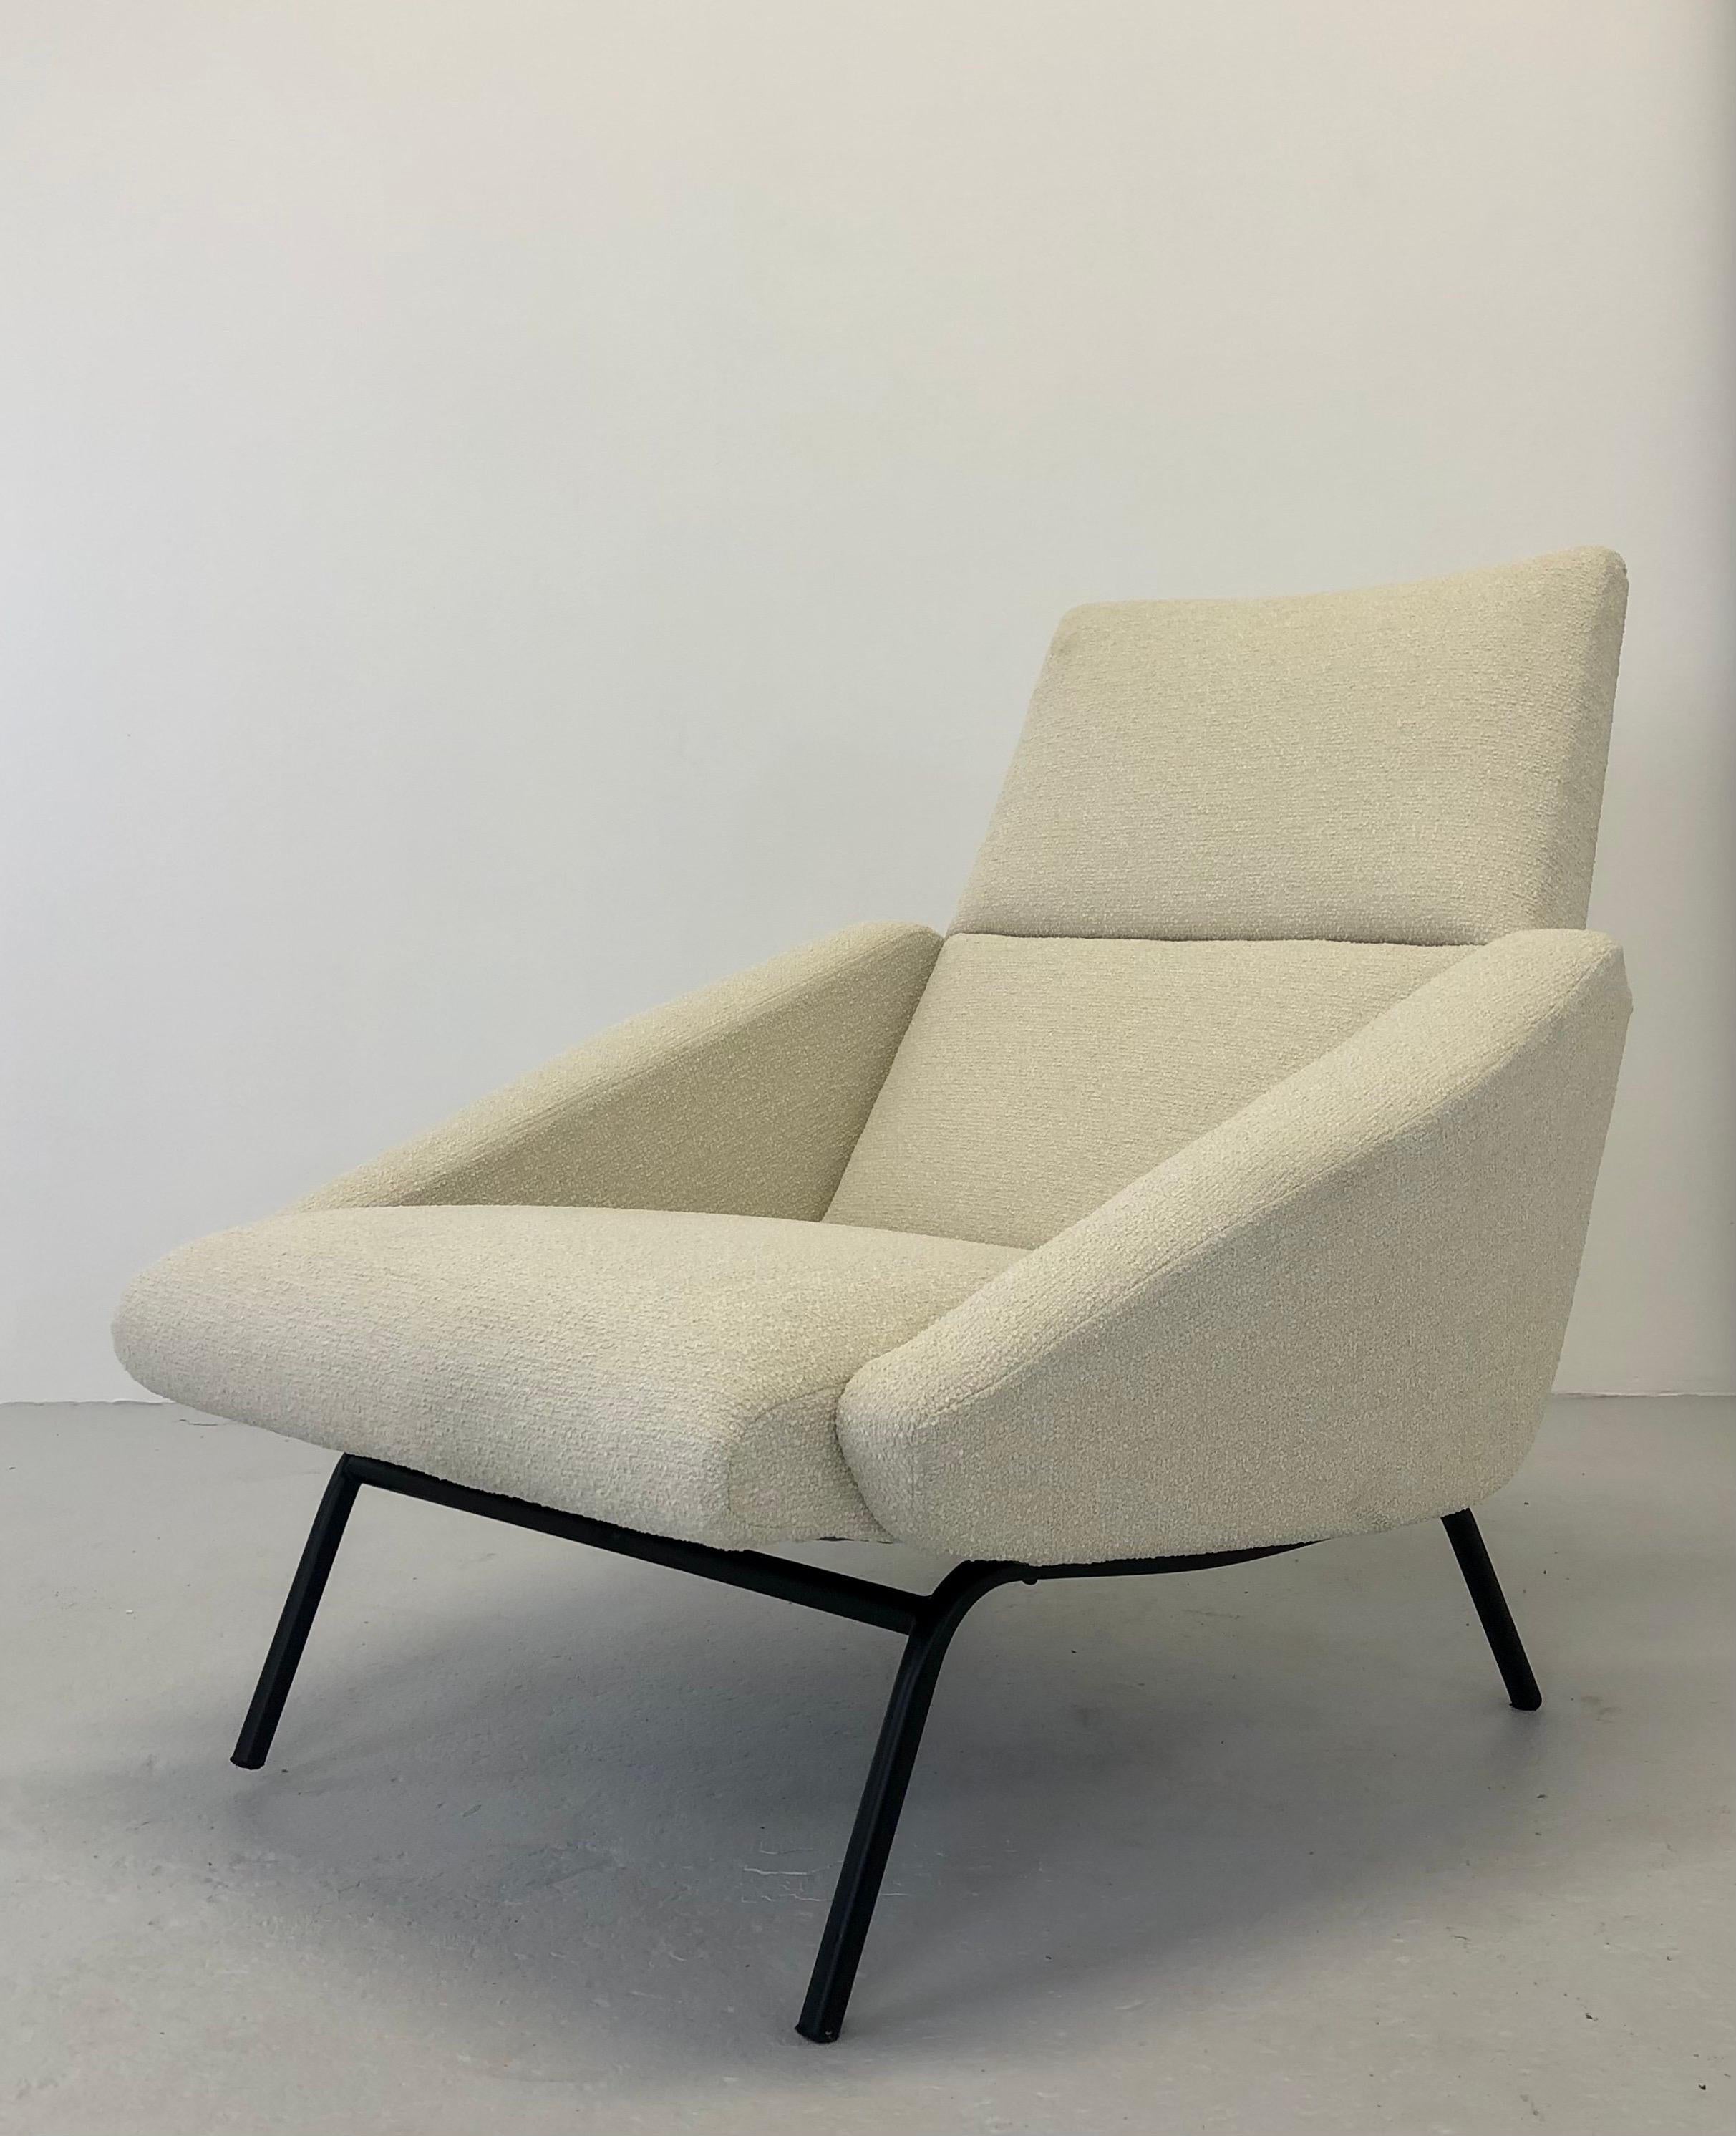 his armchair by Gérard Guermonprez, typical of 1950s furniture in France, shares similarities with the works of Pierre Paulin and Pierre Guariche, two iconic figures in design during that era. These designers embraced a modern and functional